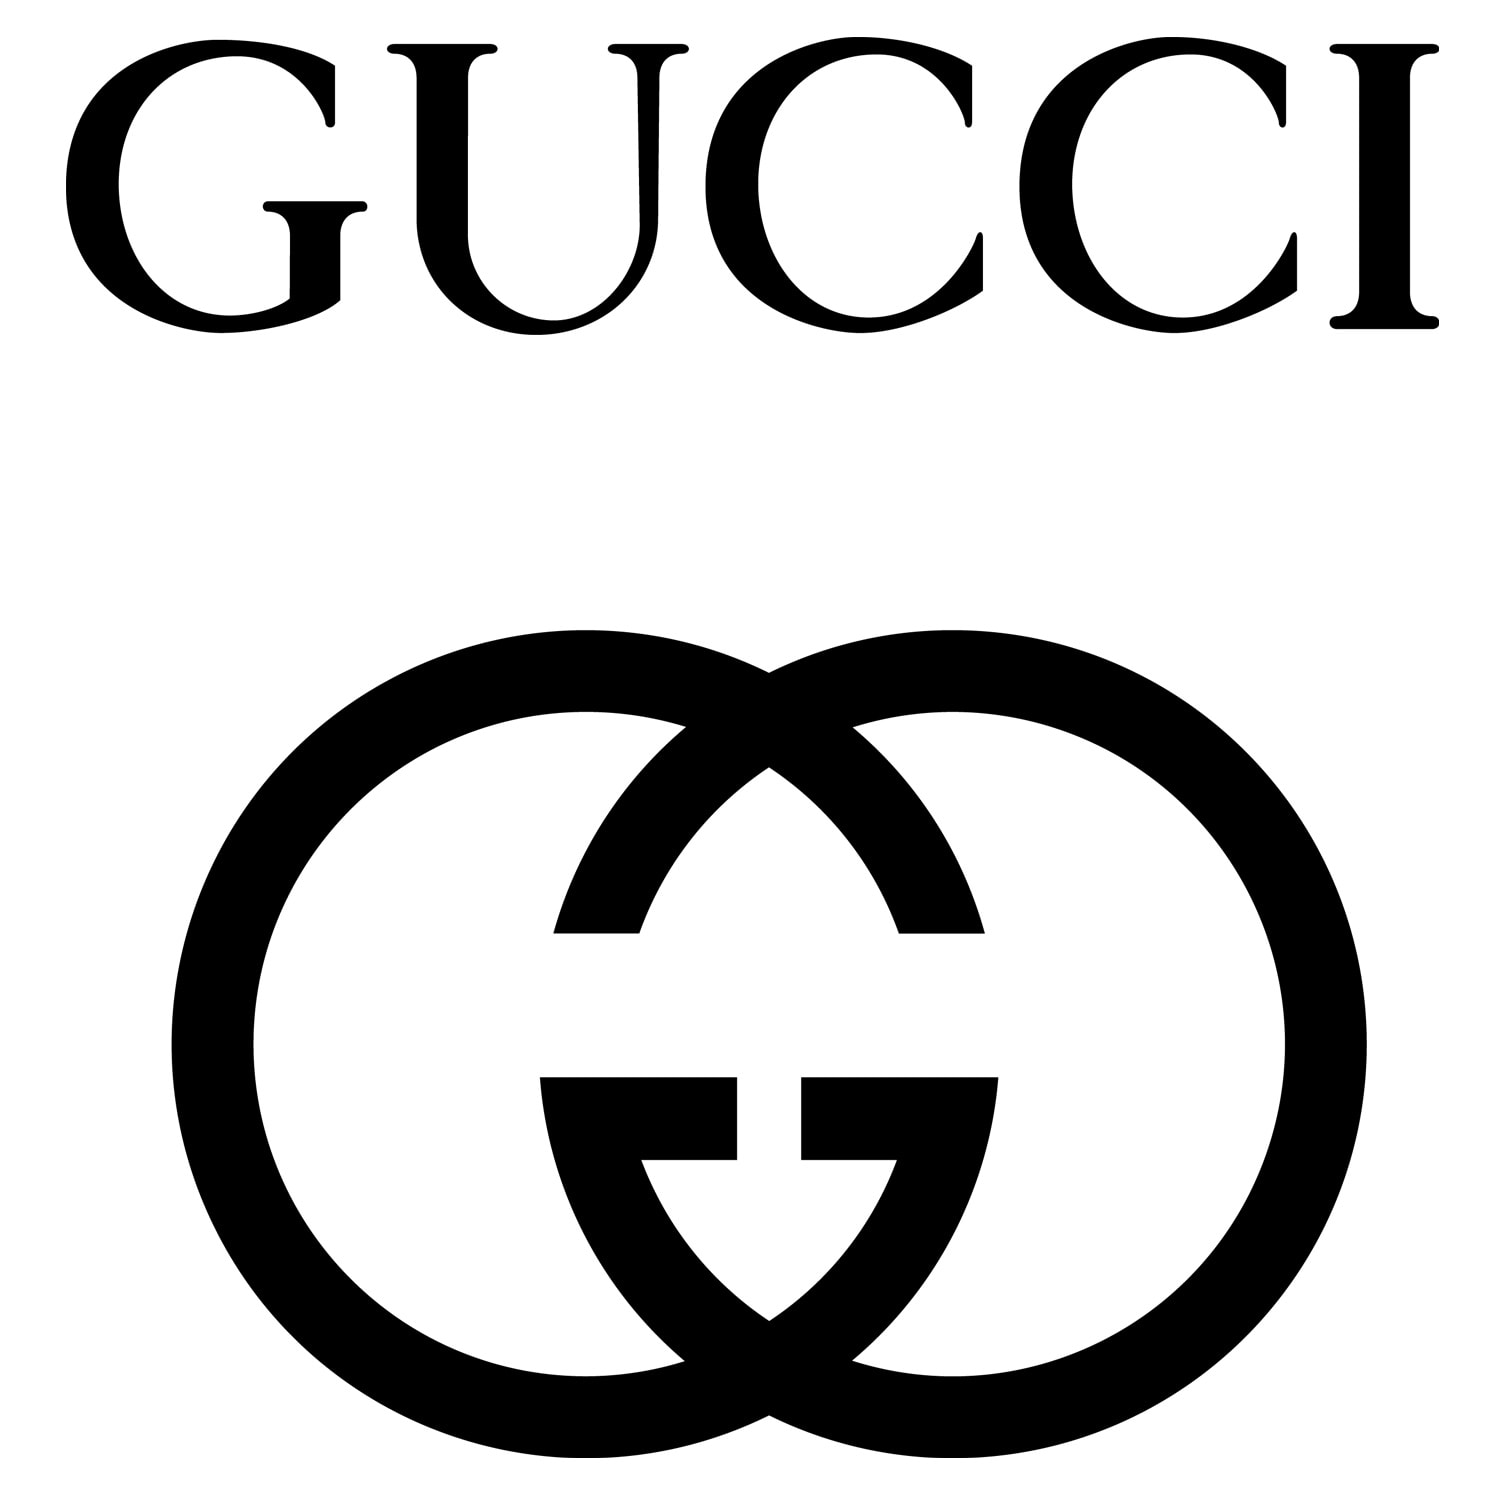 Gucci's interlocking G logo, which is the initials of Guccio Gucci, has become synonymous with luxury and sophistication